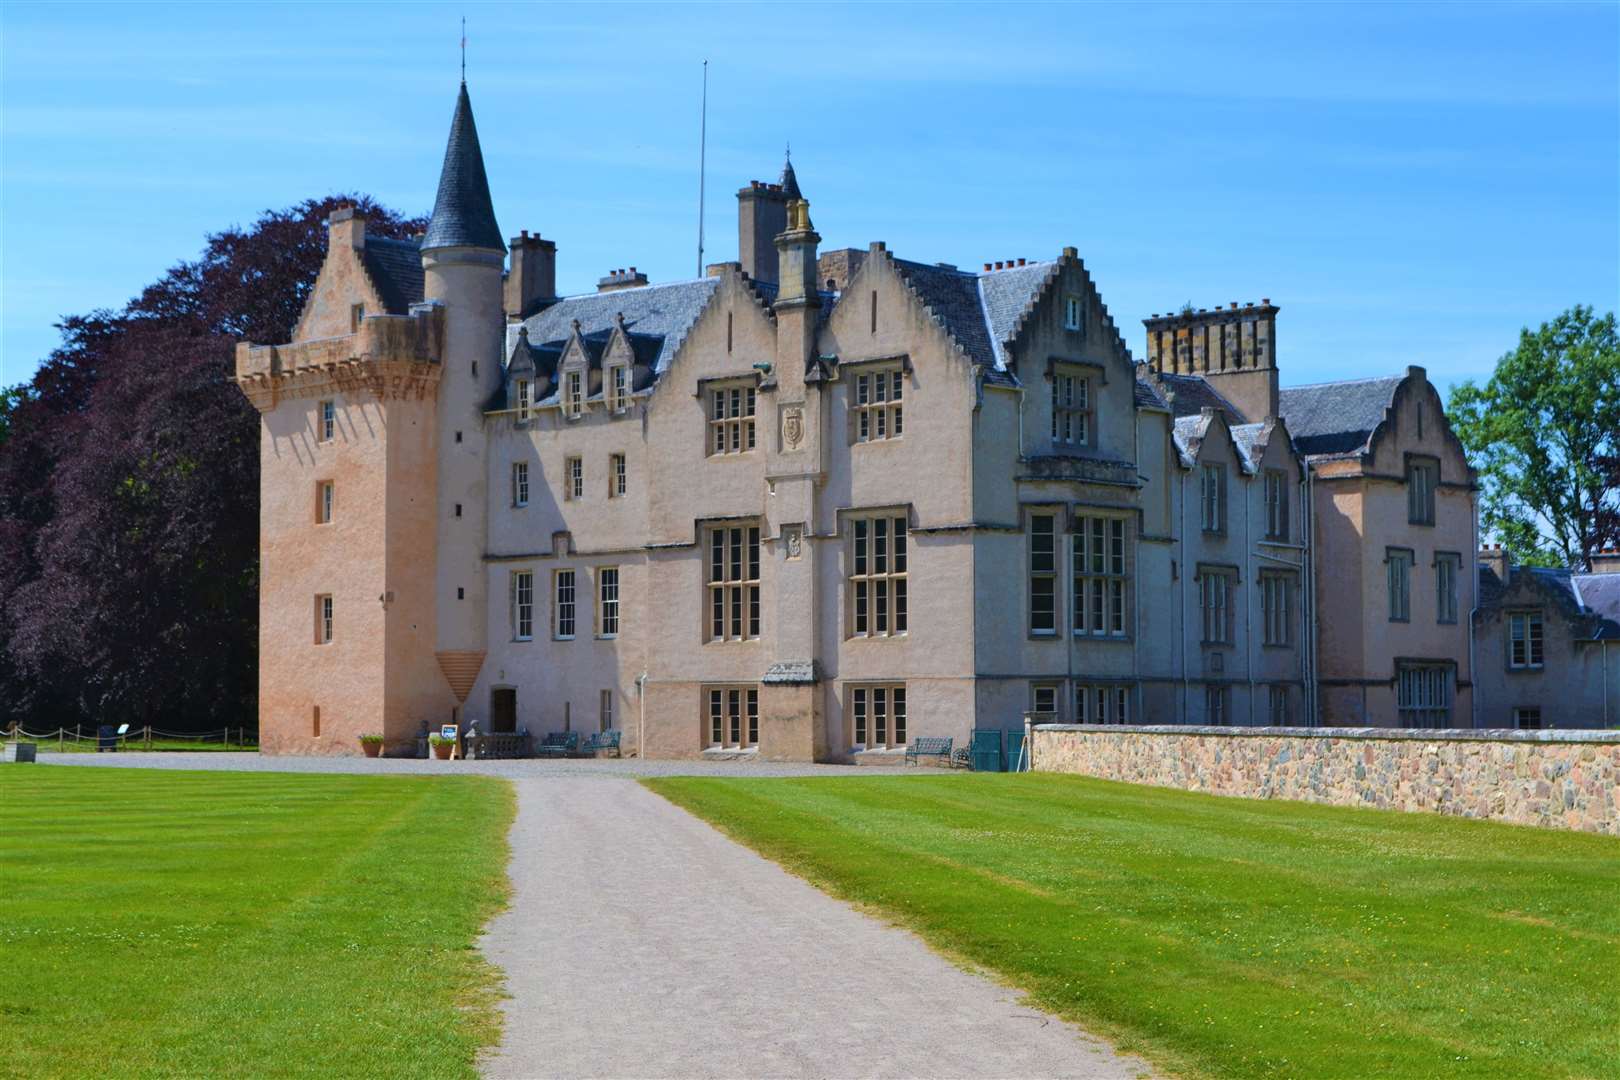 Brodie Castle, near Forres, where the walk will take place.